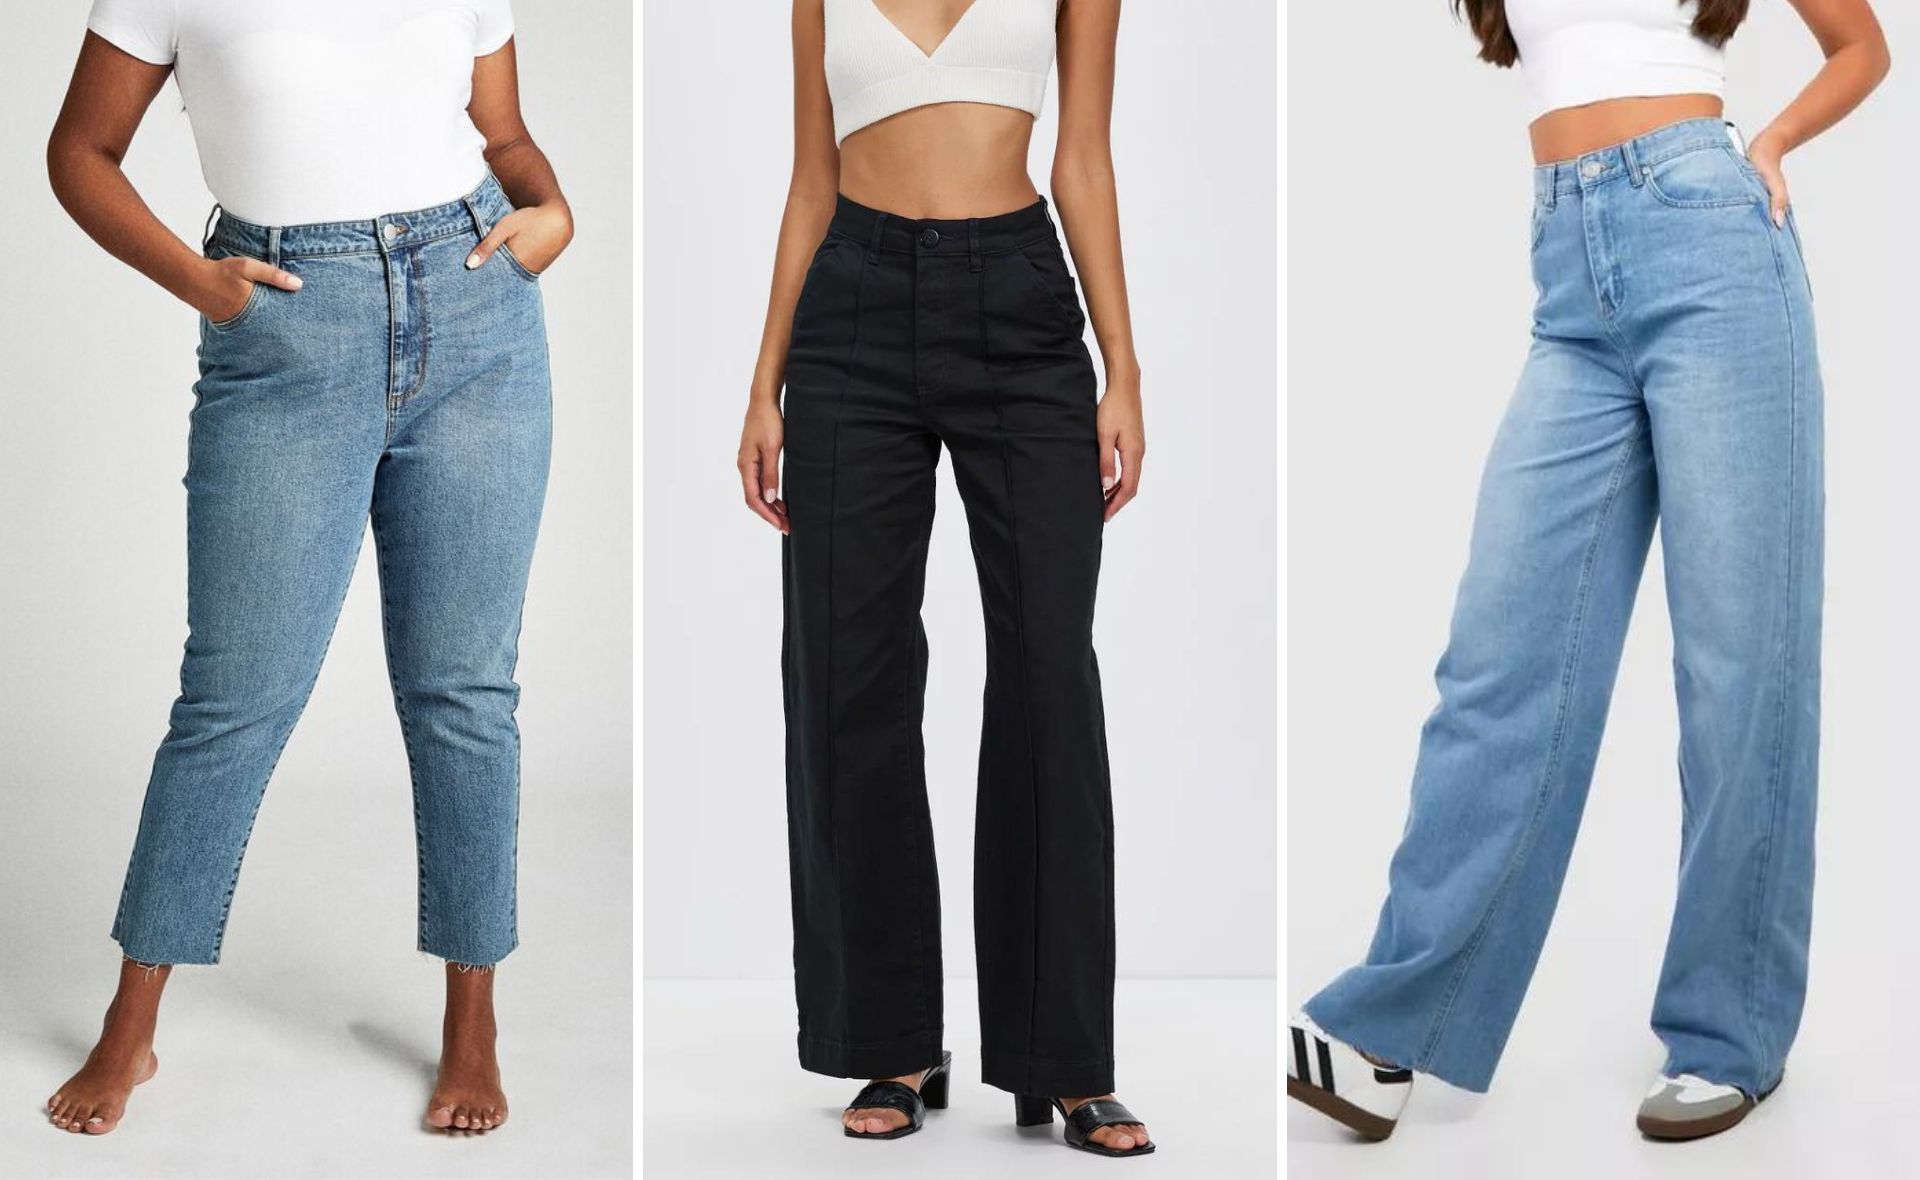 The Best Jeans Under $100 in Australia: 7 of the Best Styles